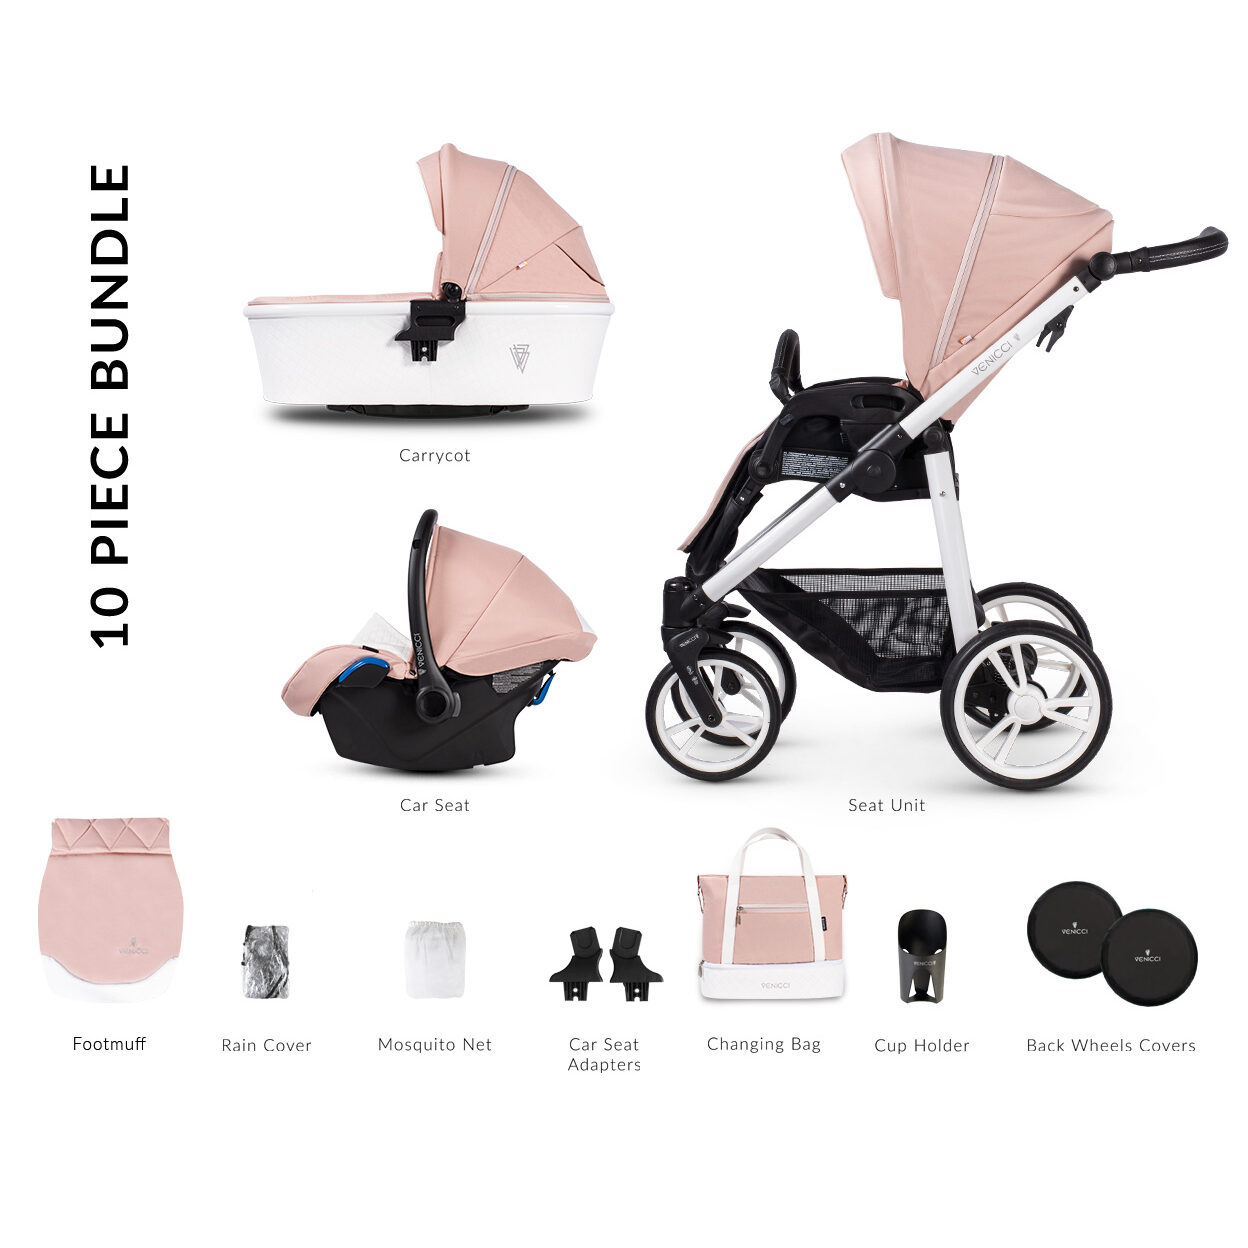 Venicci Leatherette Pure Rose Travel System New 2021 Model - How To Fit Venicci Car Seat With Seatbelt